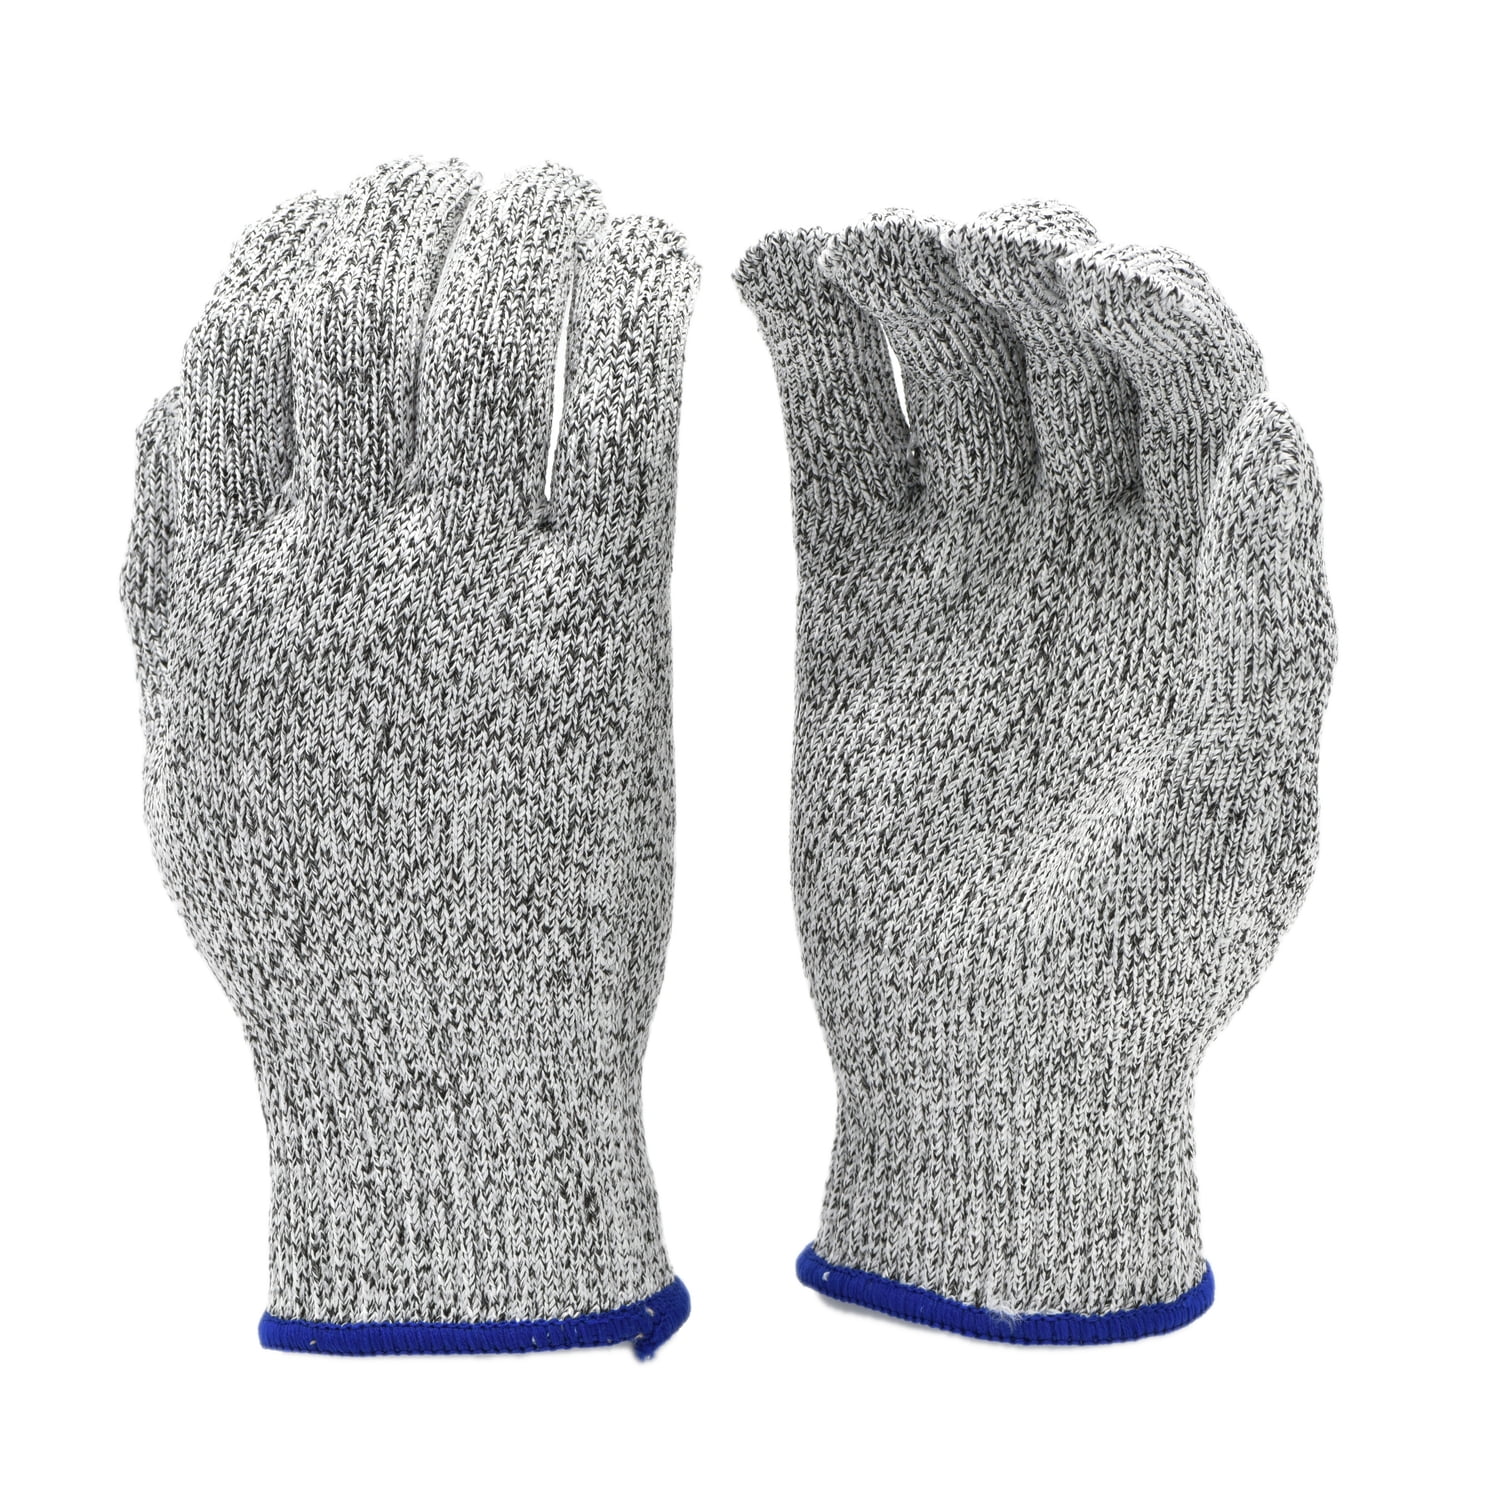 Schwer AIR-SKIN Cut Resistant Work Gloves with Extreme Lightweight & Thin,  Level 5 Cutting Gloves for Refined Work, Touch-screen, Fiberglass-free